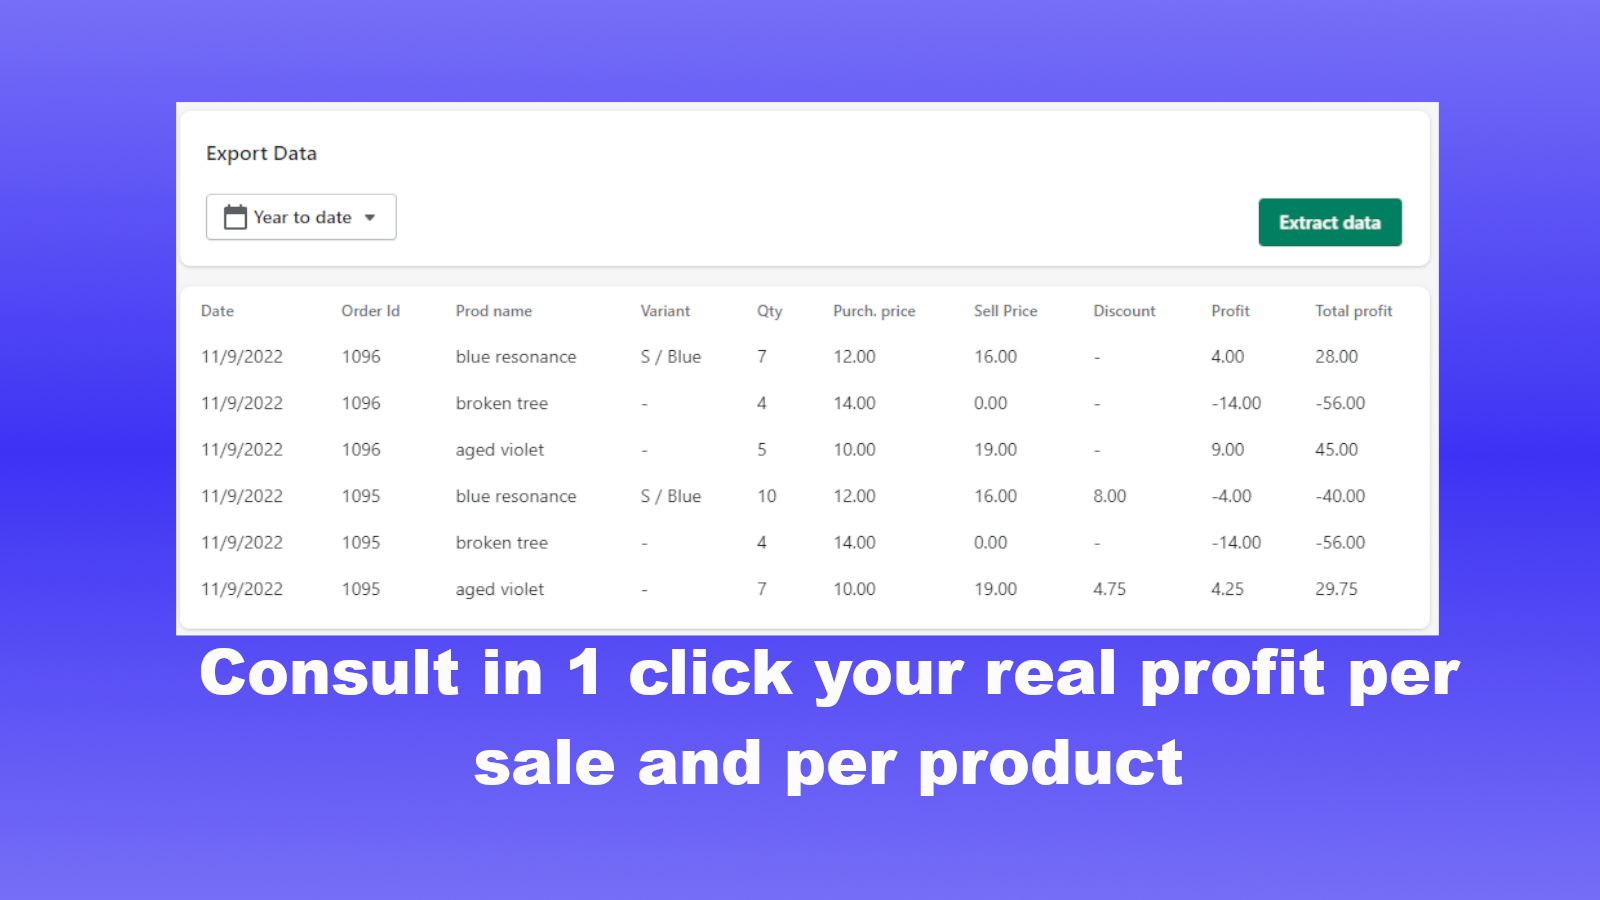 Consult in 1 click your real profit per sale and per product